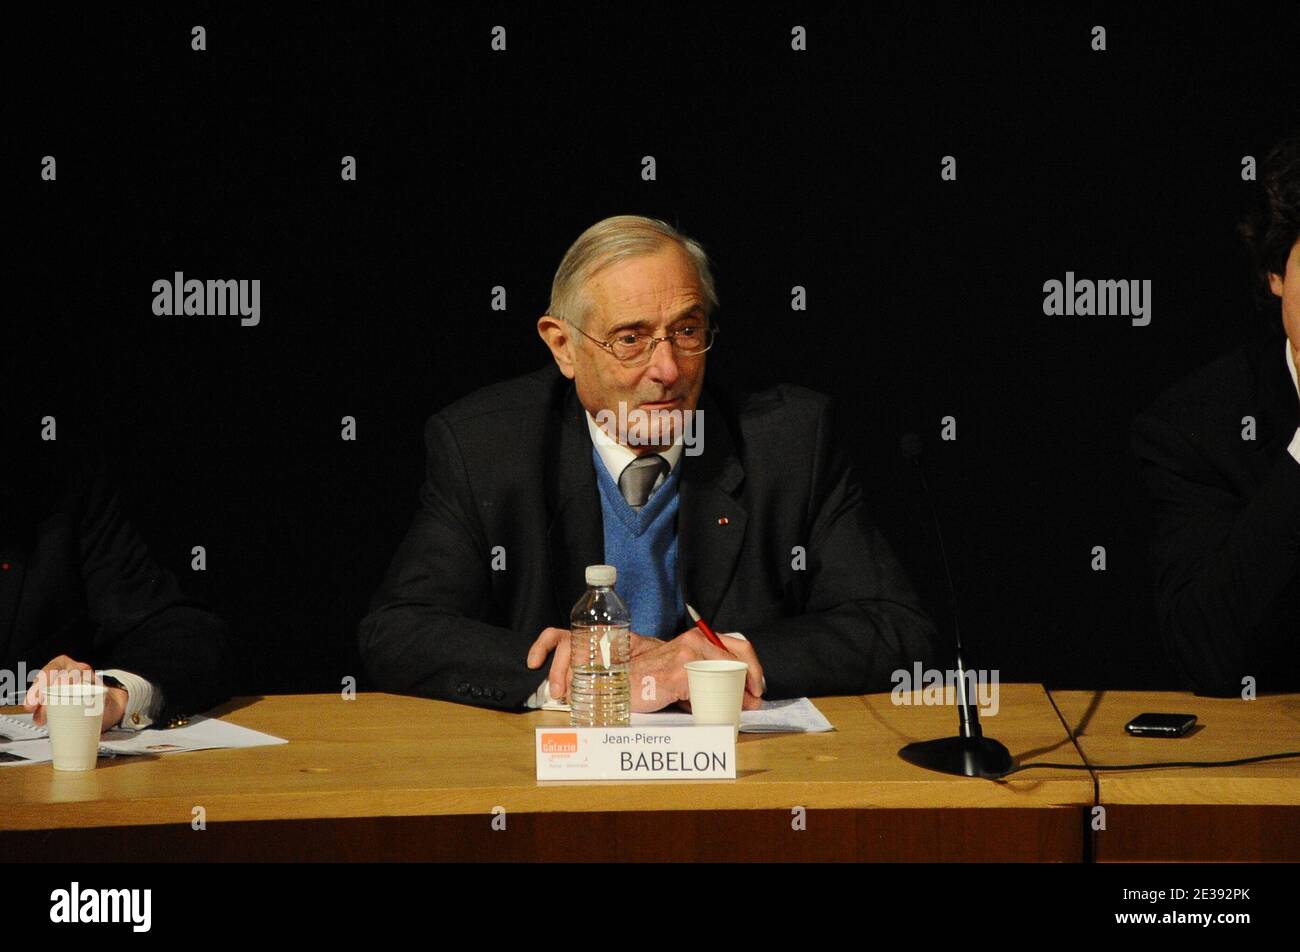 Jean-Pierre Babelon during a press conference held at Grand Palais in Paris, France on December 16, 2010 where scientists said they have identified an embalmed head as belonging to King Henri IV of France, who was assassinated in 1610 at the age of 57. The head was lost after revolutionaries ransacked the royal chapel at Saint Denis, near Paris, in 1793. A head, presumed to be that of Henri IV, has passed between private collectors since then. Photo by Nicolas Briquet/ABACAPRESS.COM Stock Photo